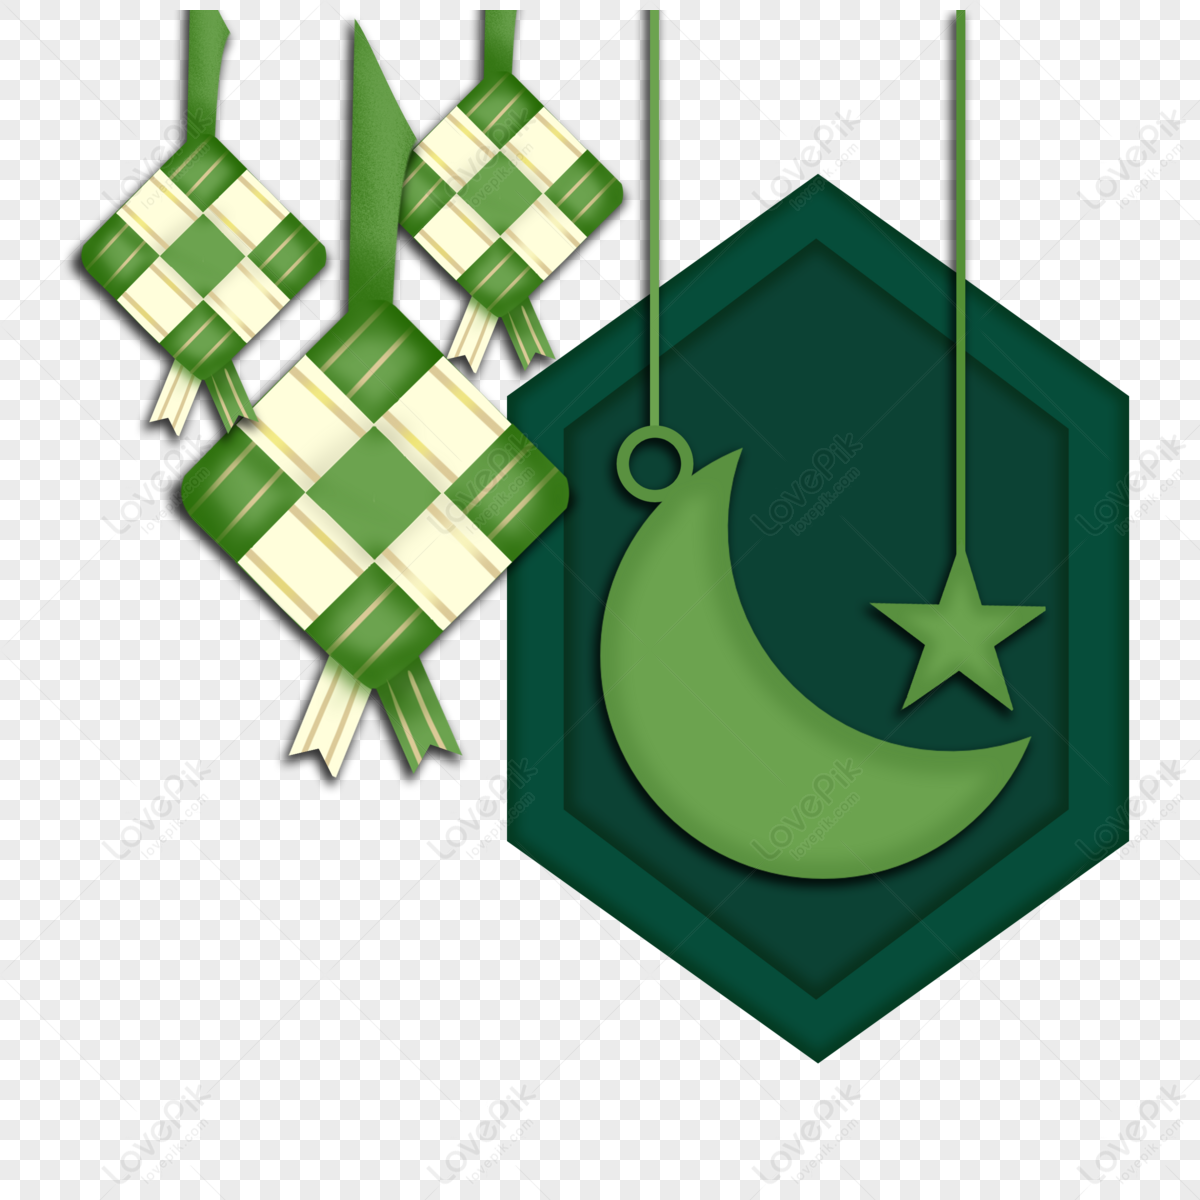 Raya Icon PNG Images With Transparent Background